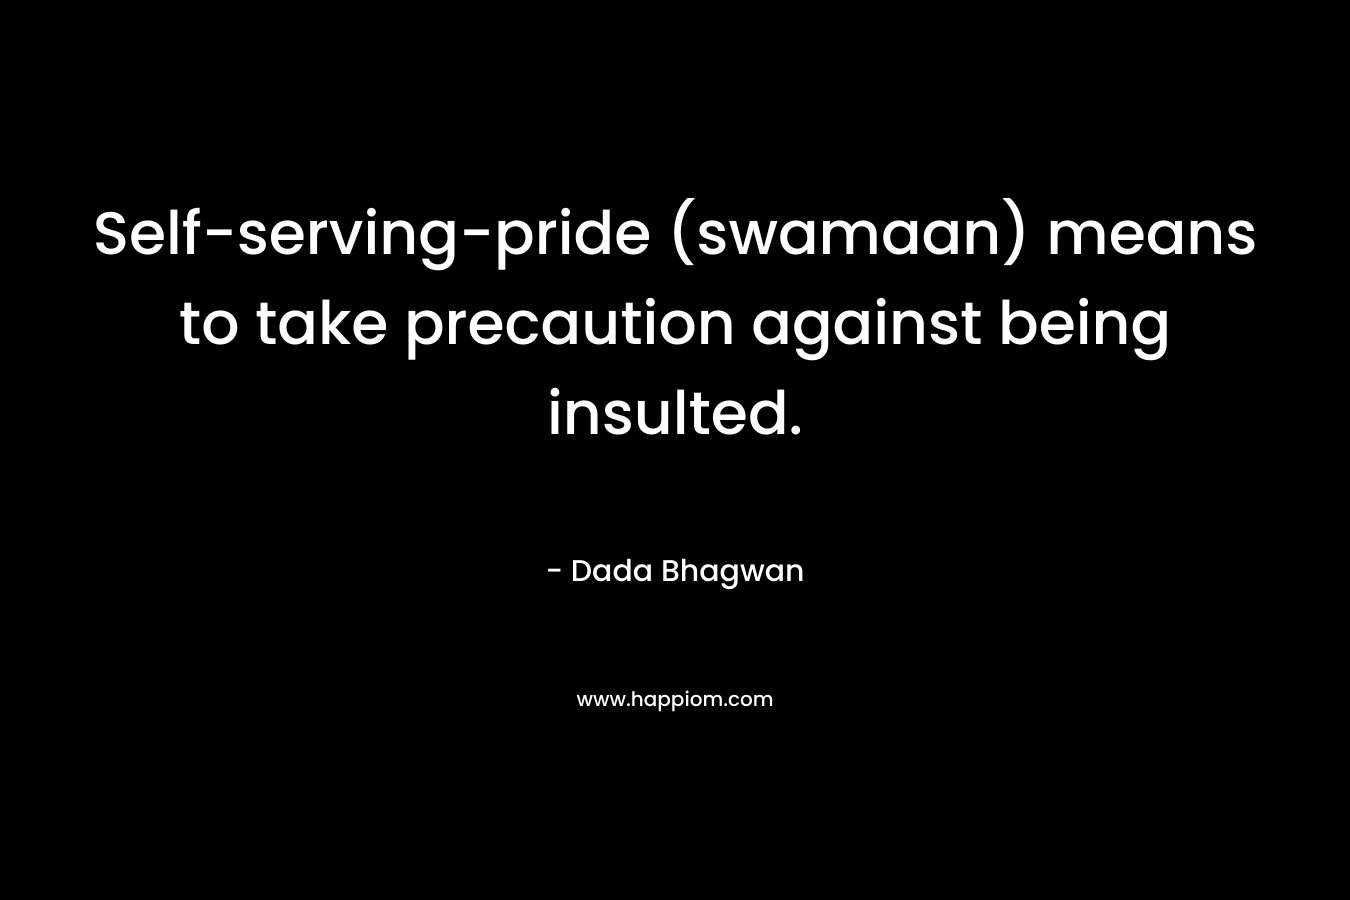 Self-serving-pride (swamaan) means to take precaution against being insulted. – Dada Bhagwan